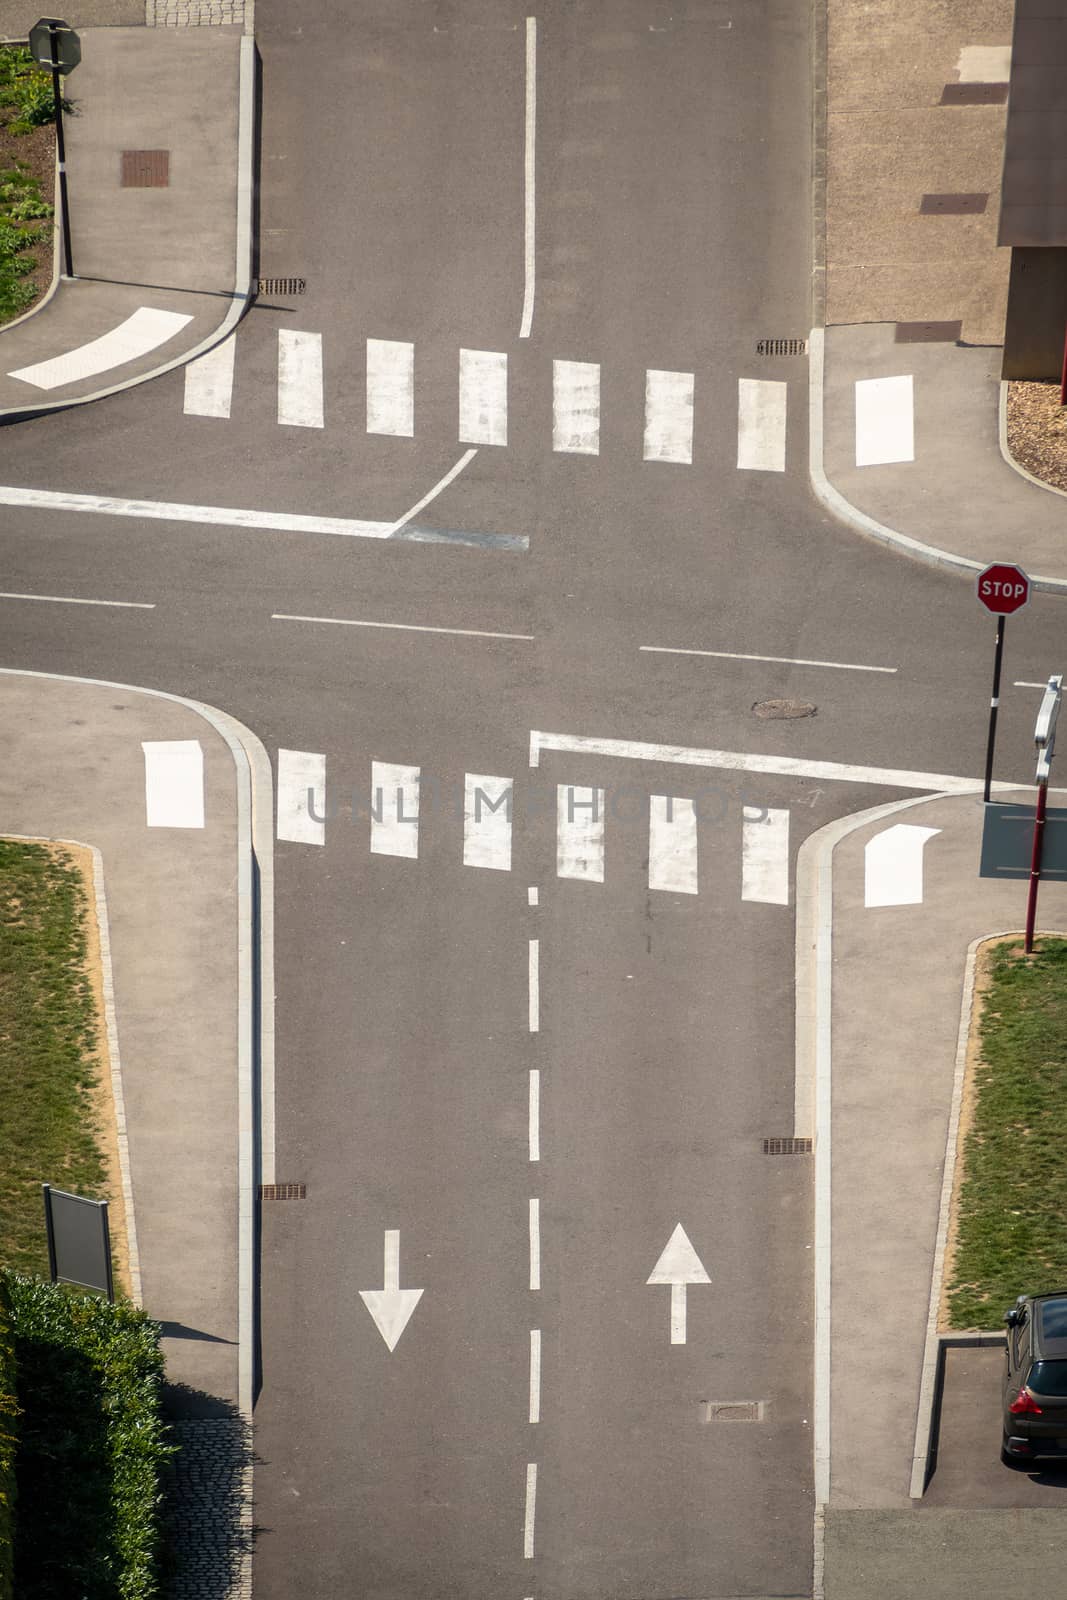 An image of a typical crossing from above